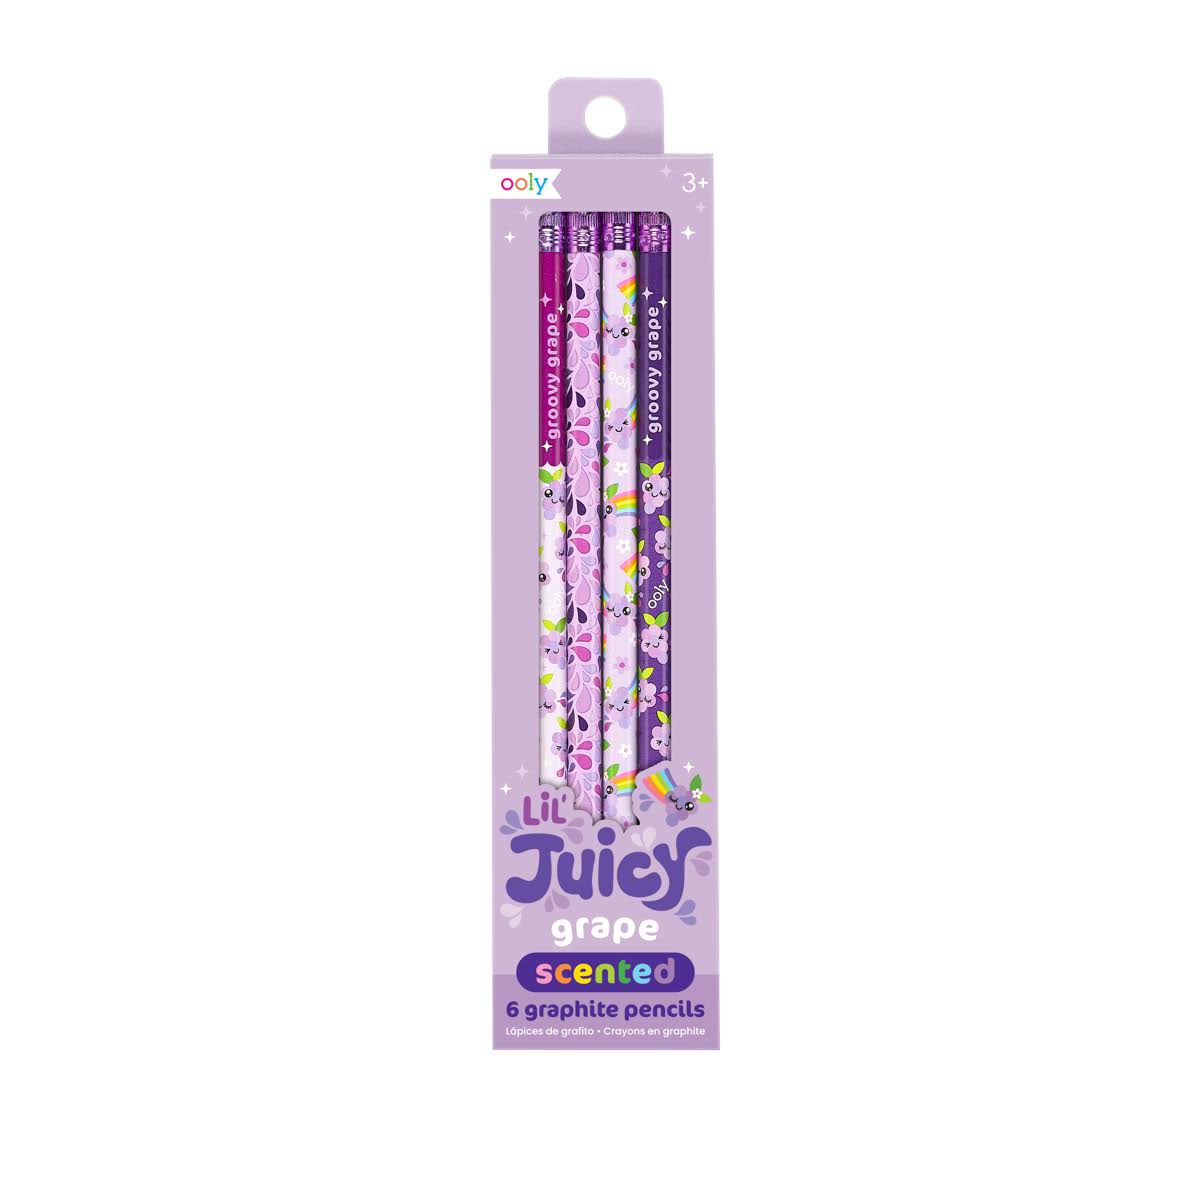 Ooly Lil Juicy Grape Scented Graphite Pencils